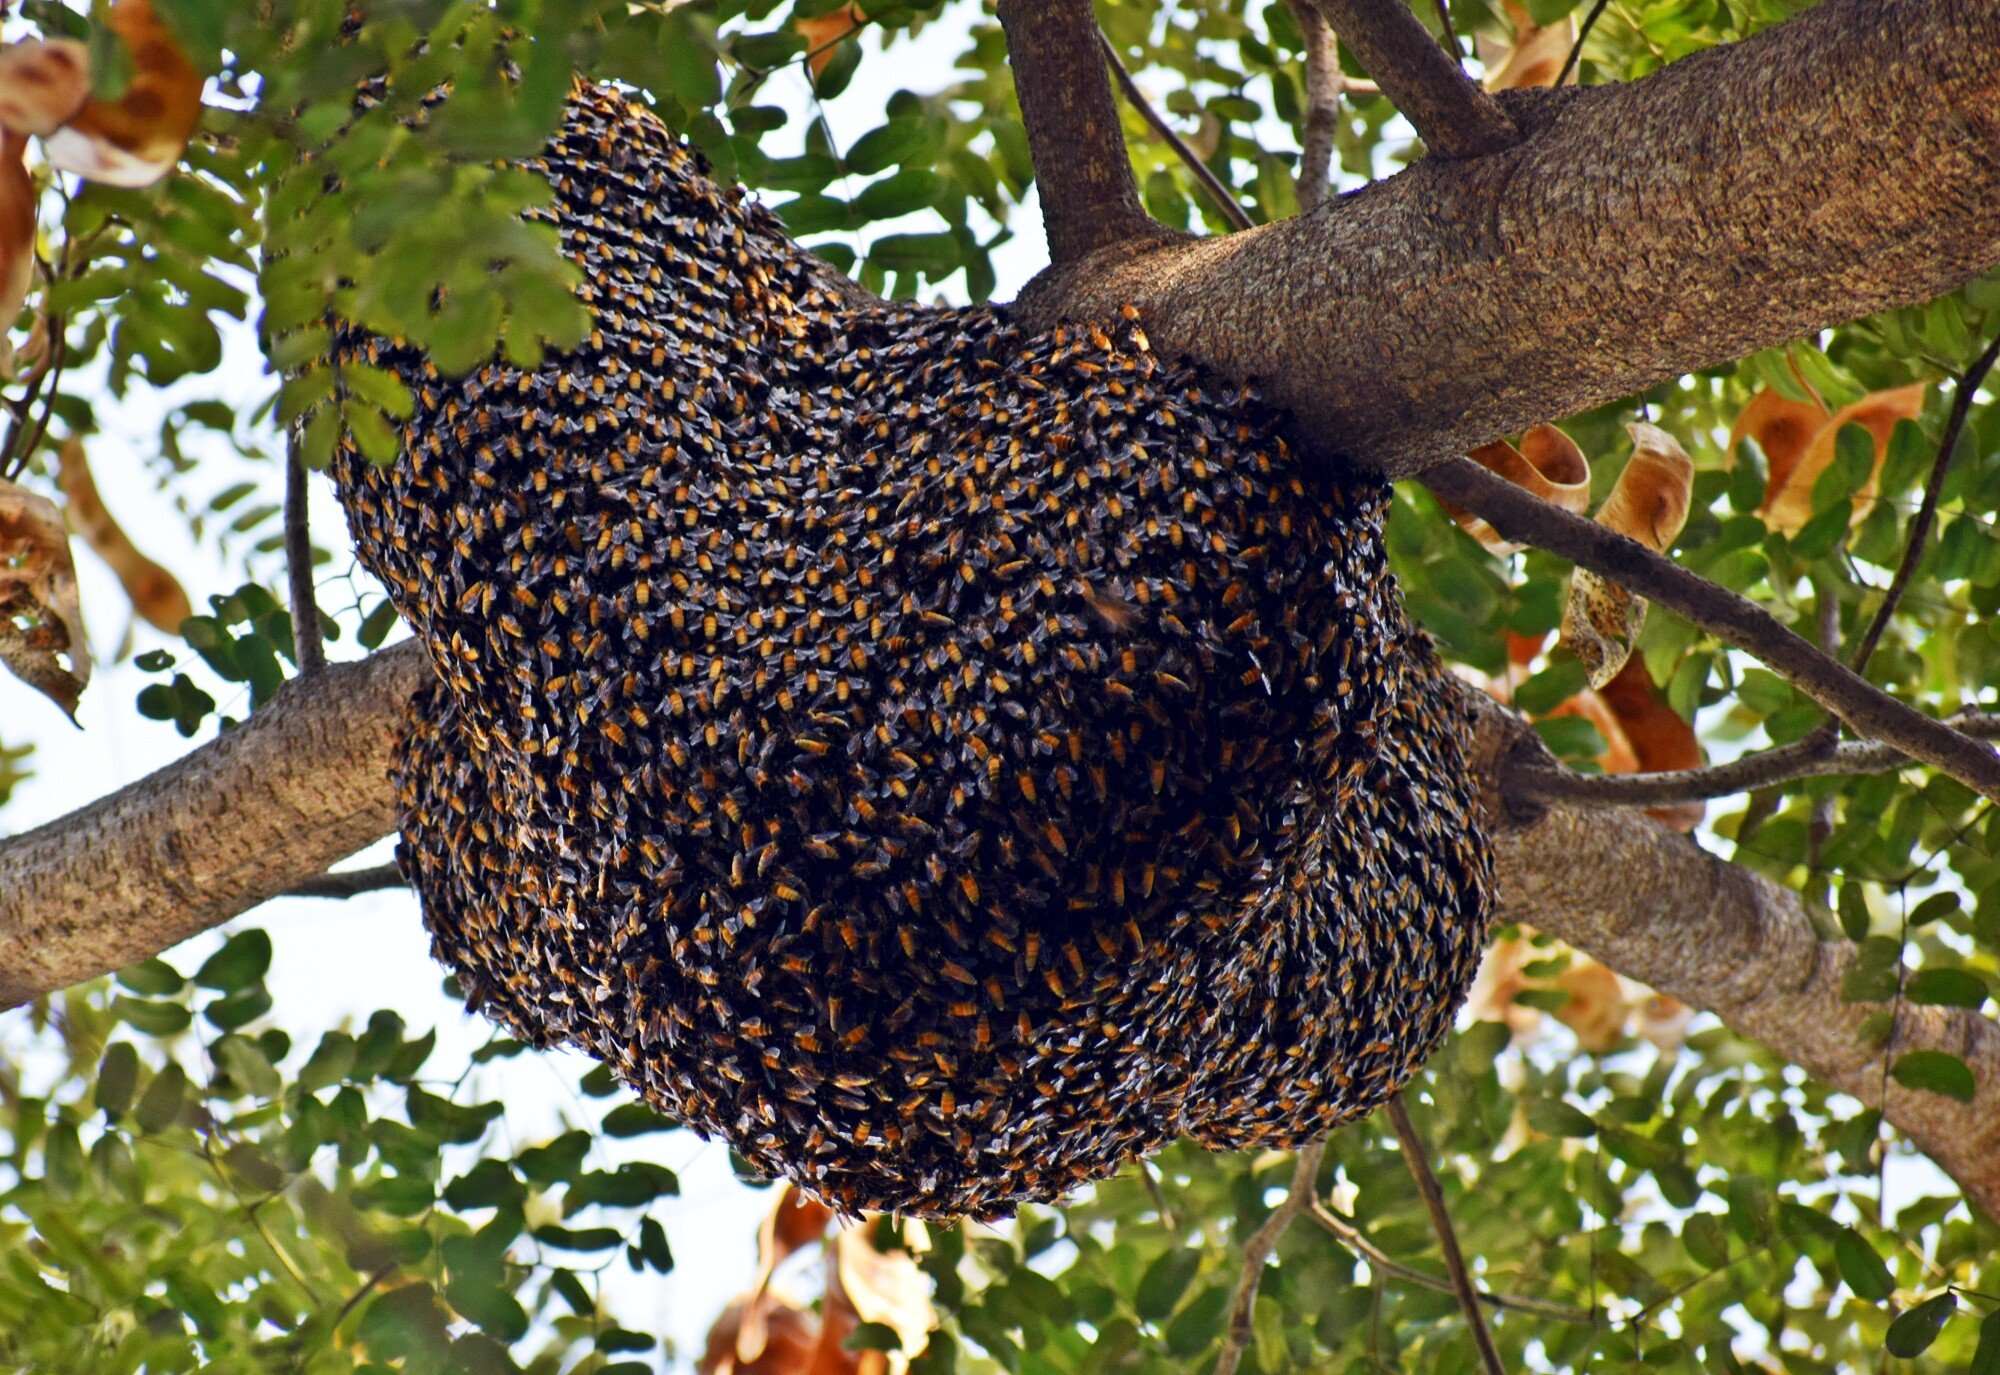 The Key Steps on How to Remove a Bee Hive From a Tree